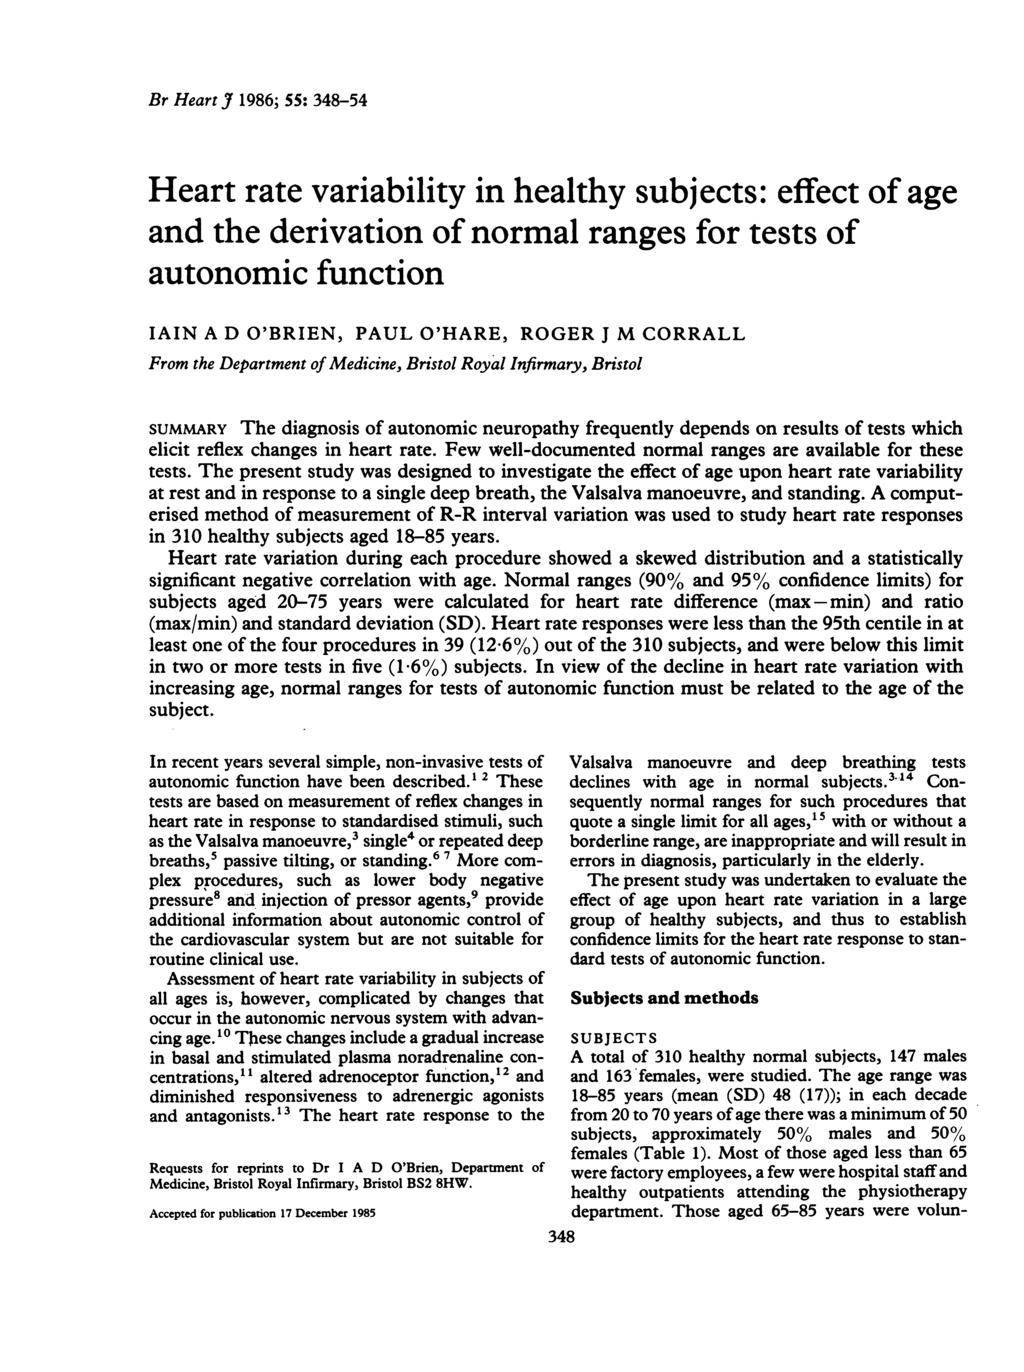 Br Heart J 1986; 55: 348-54 Heart rate variability in healthy subjects: effect of age and the derivation of normal ranges for tests of autonomic function IAIN A D O'BRIEN, PAUL O'HARE, ROGER J M